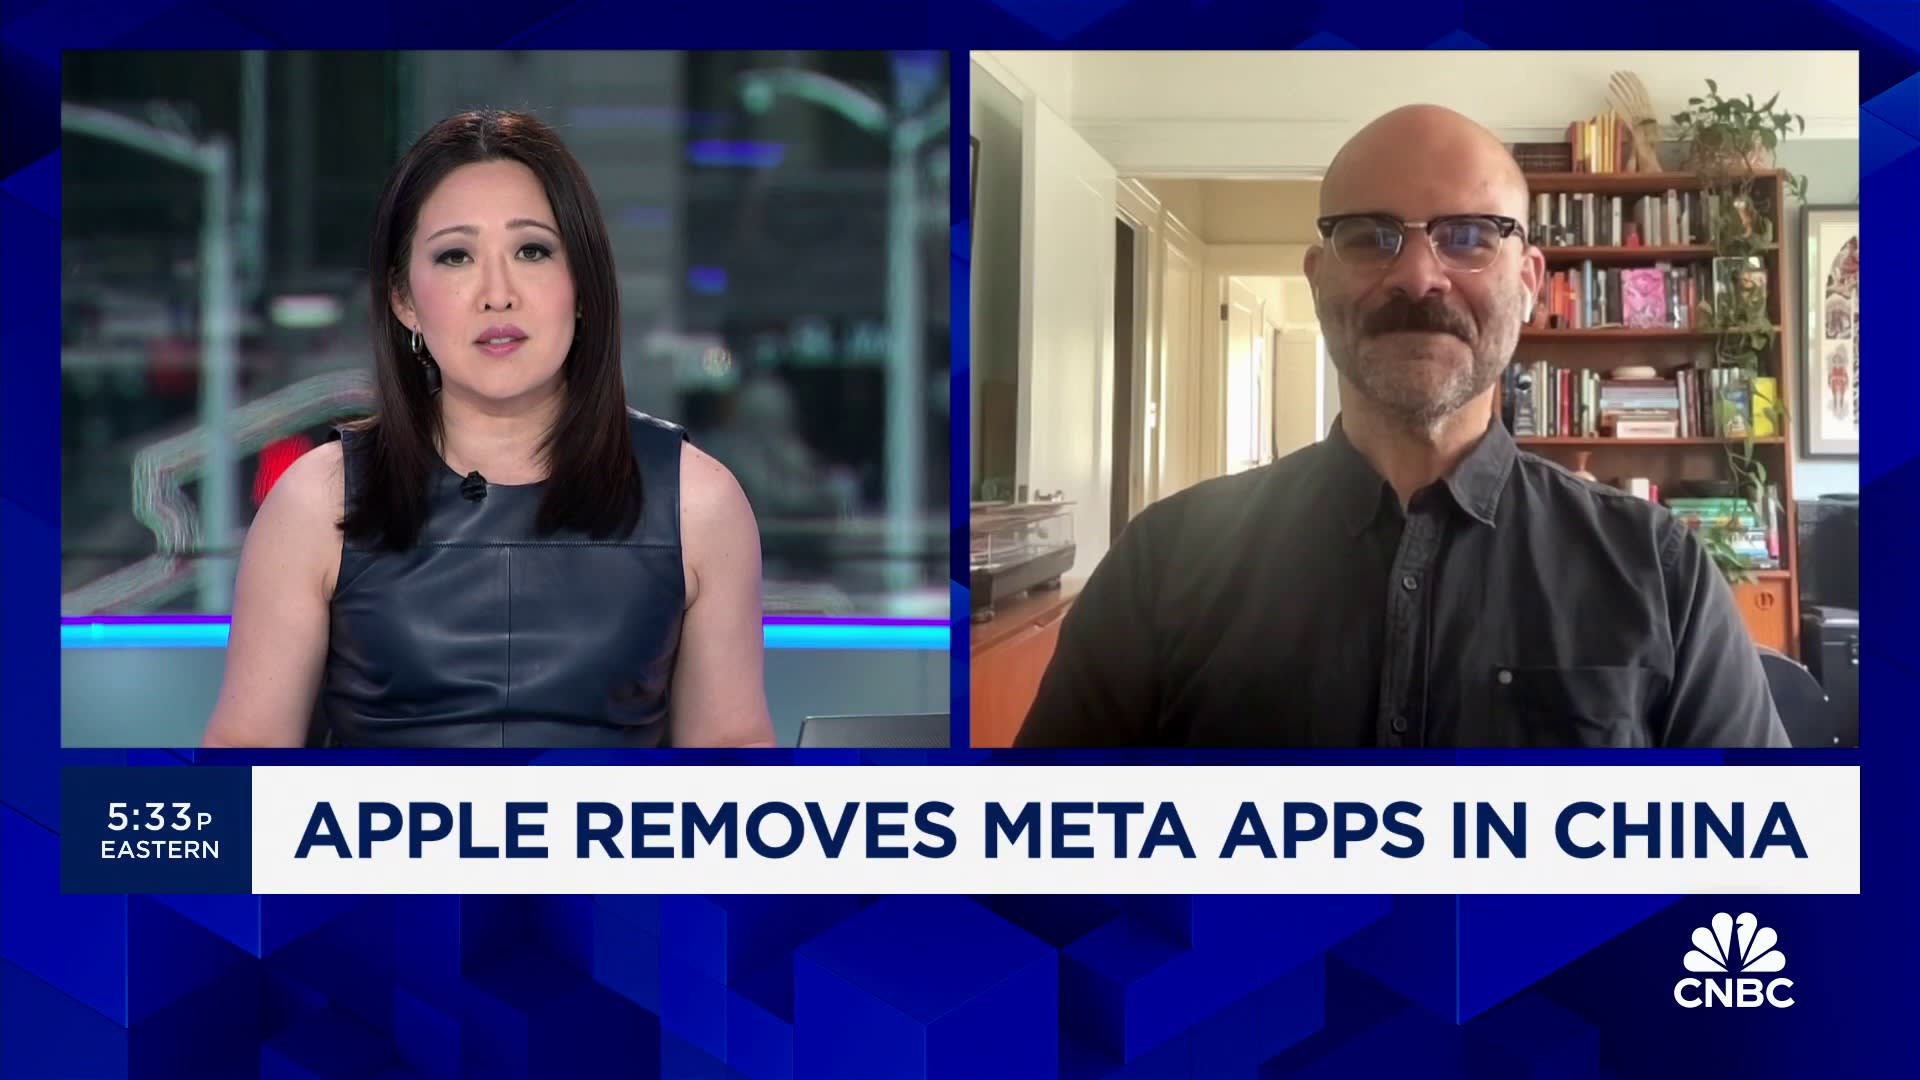 Apple, Meta caught in proxy war between U.S. and China, NY Times’ Mike Isaac suggests [Video]